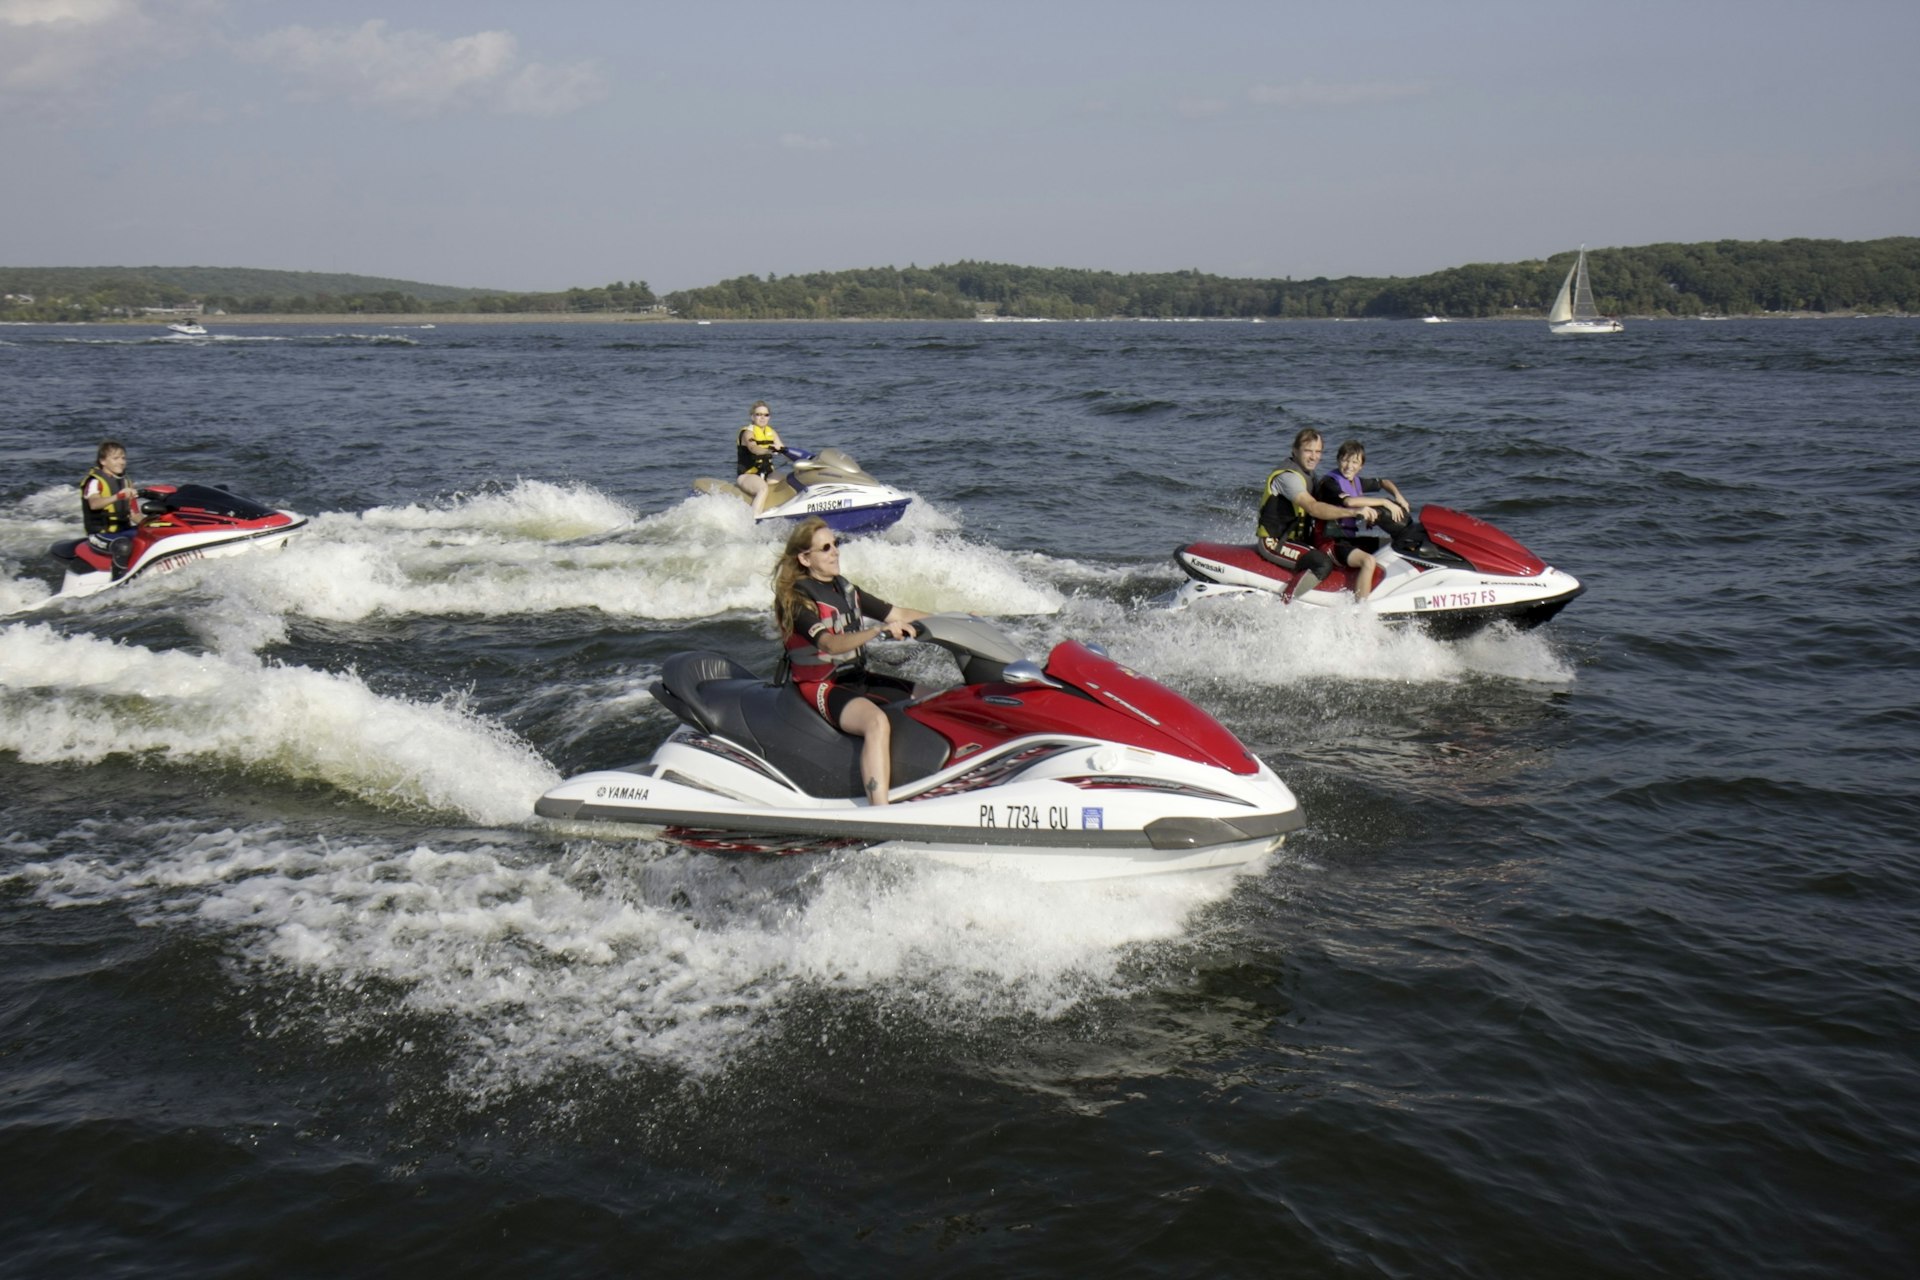 A group of people ride jet skis on Lake Wallenpaupack in Pennsylvania.